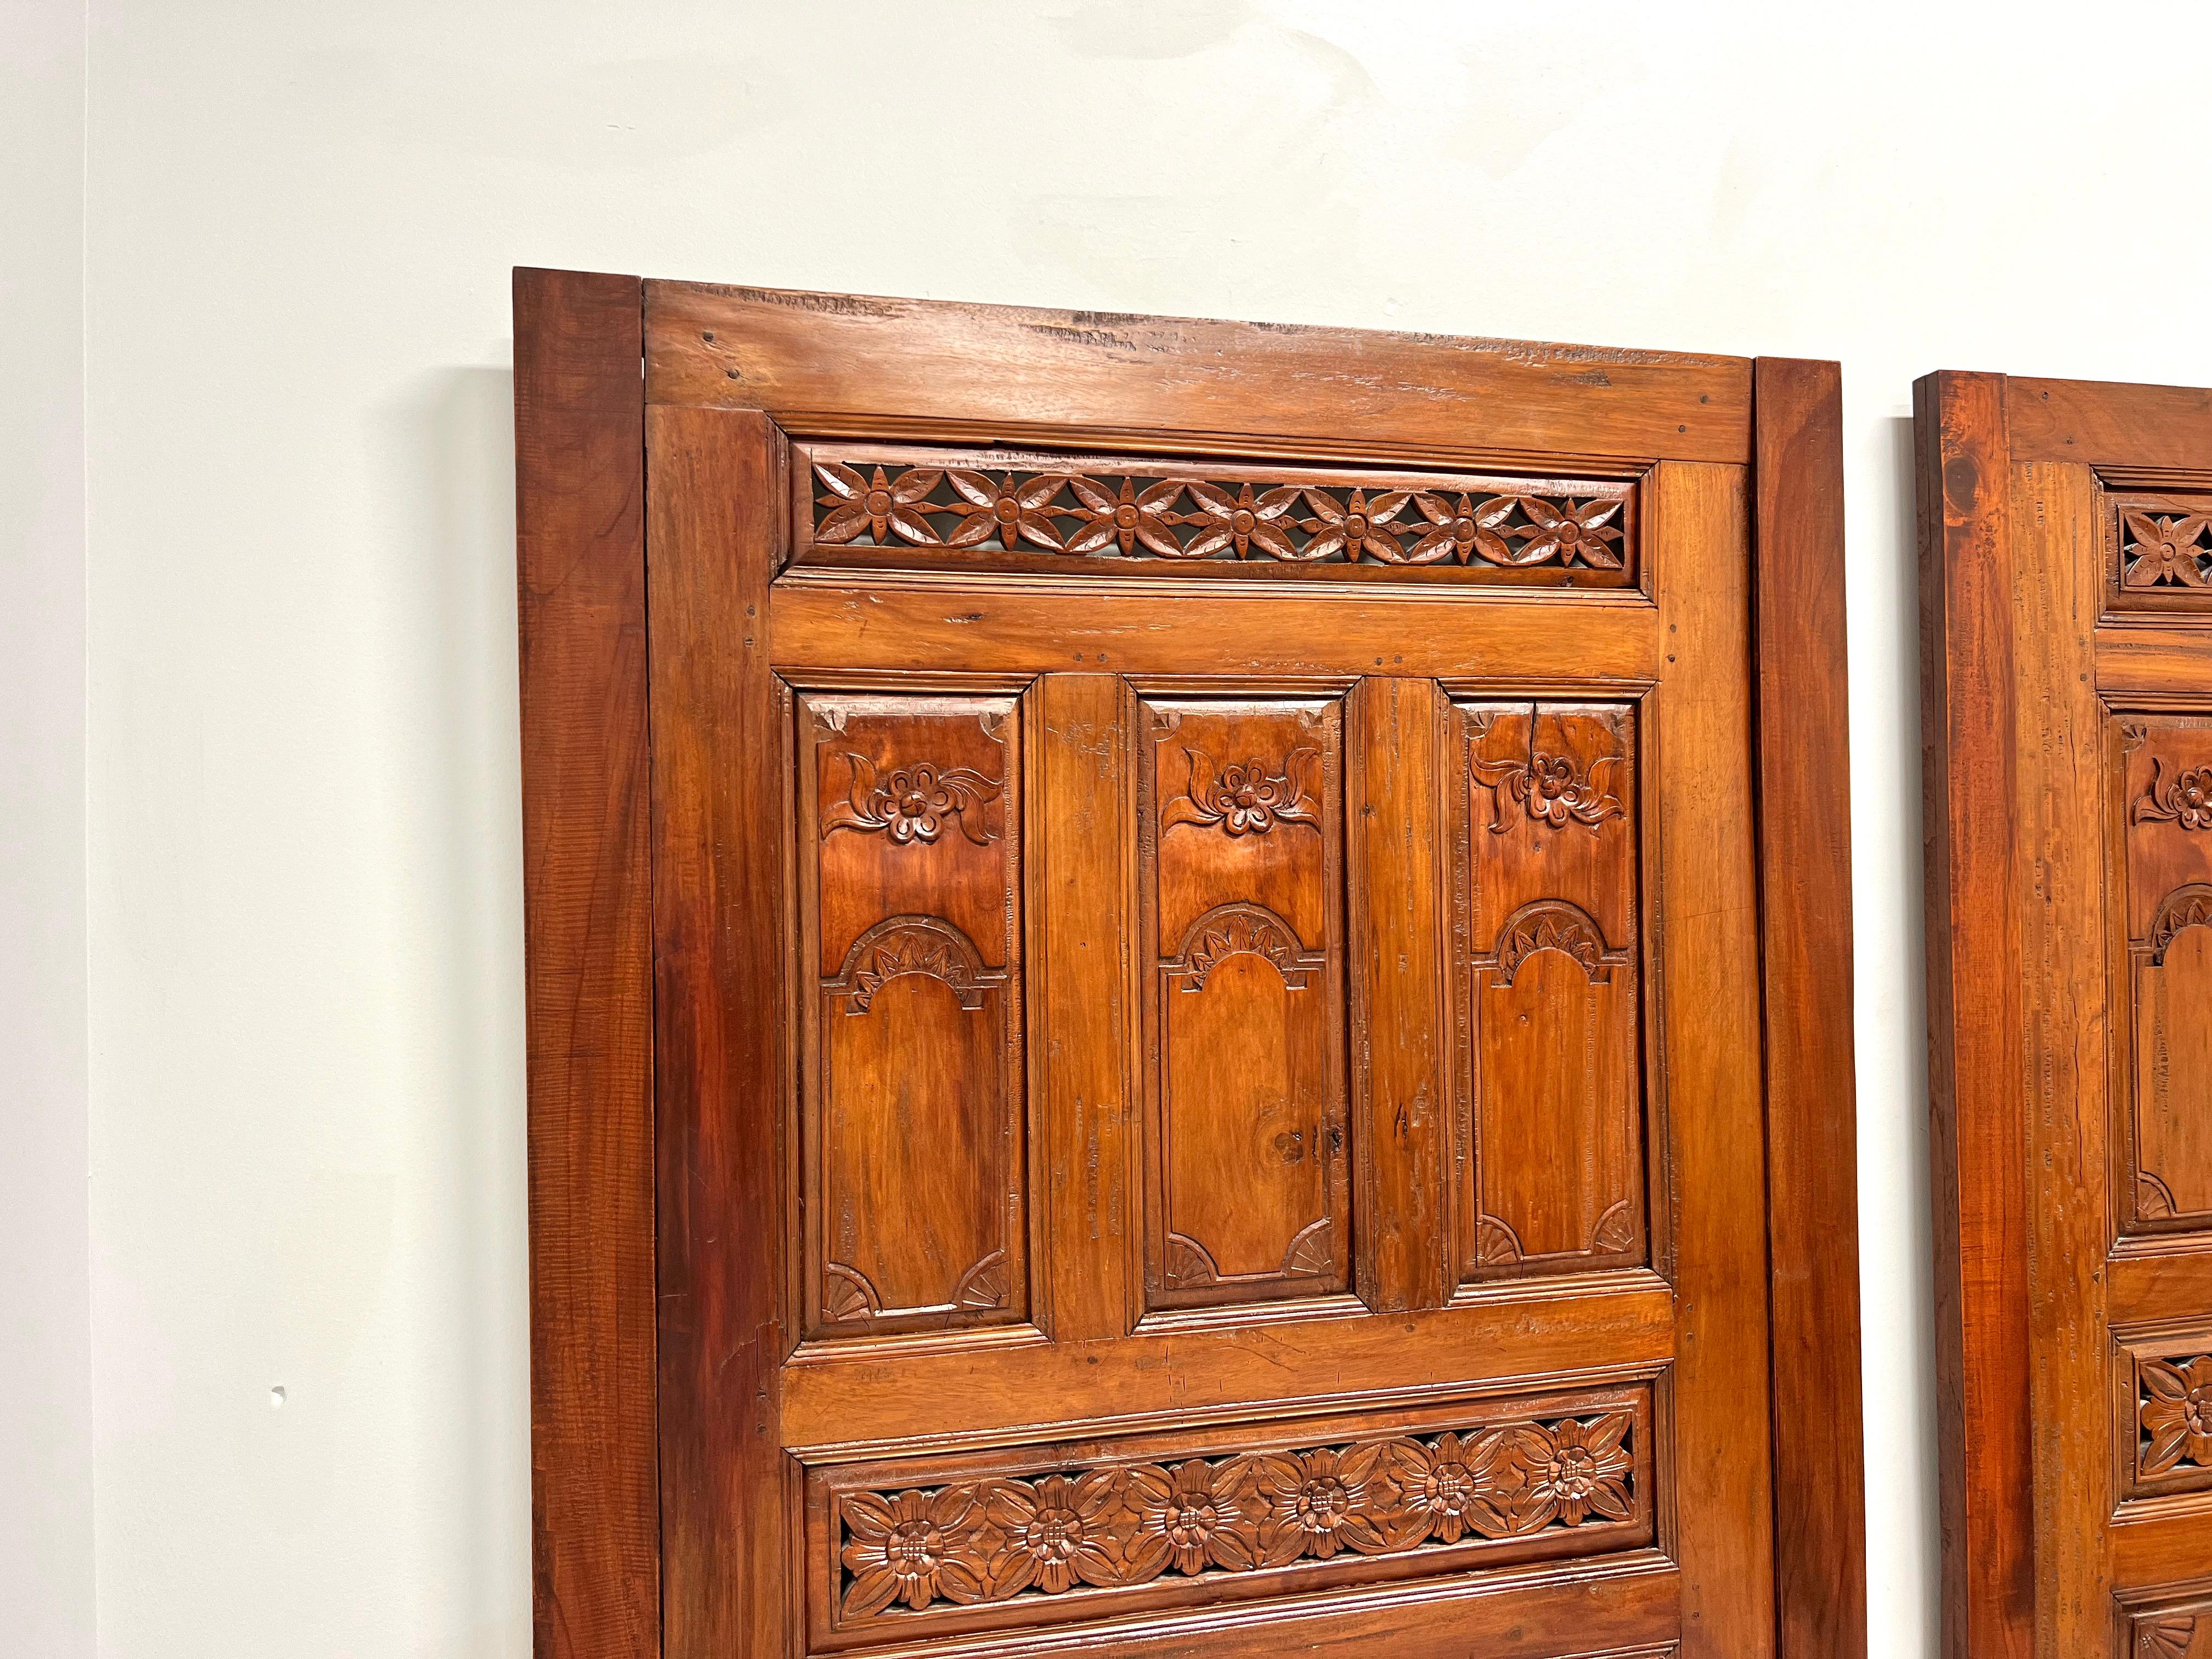 Indonesian 20th Century Carved Balinese Mahogany Doors Converted to Headboards - Pair For Sale